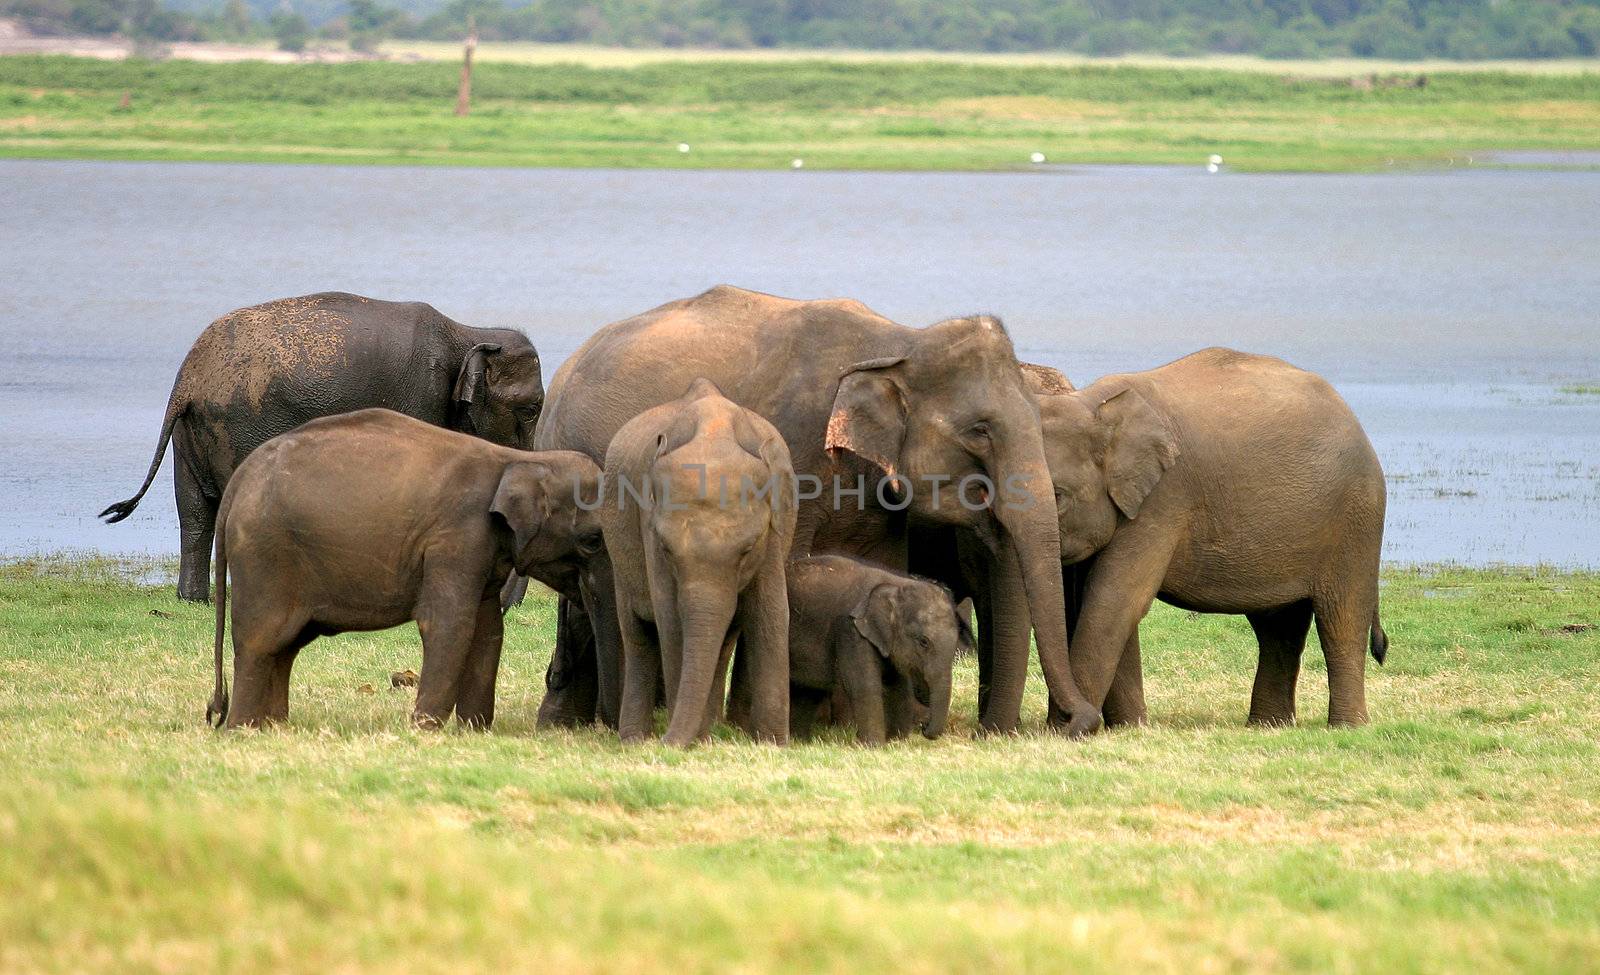 A herd of Sri Lankan elephant (the largest of four subspecies of the Asian elephant) in the Minneriya National Park, Sri Lanka